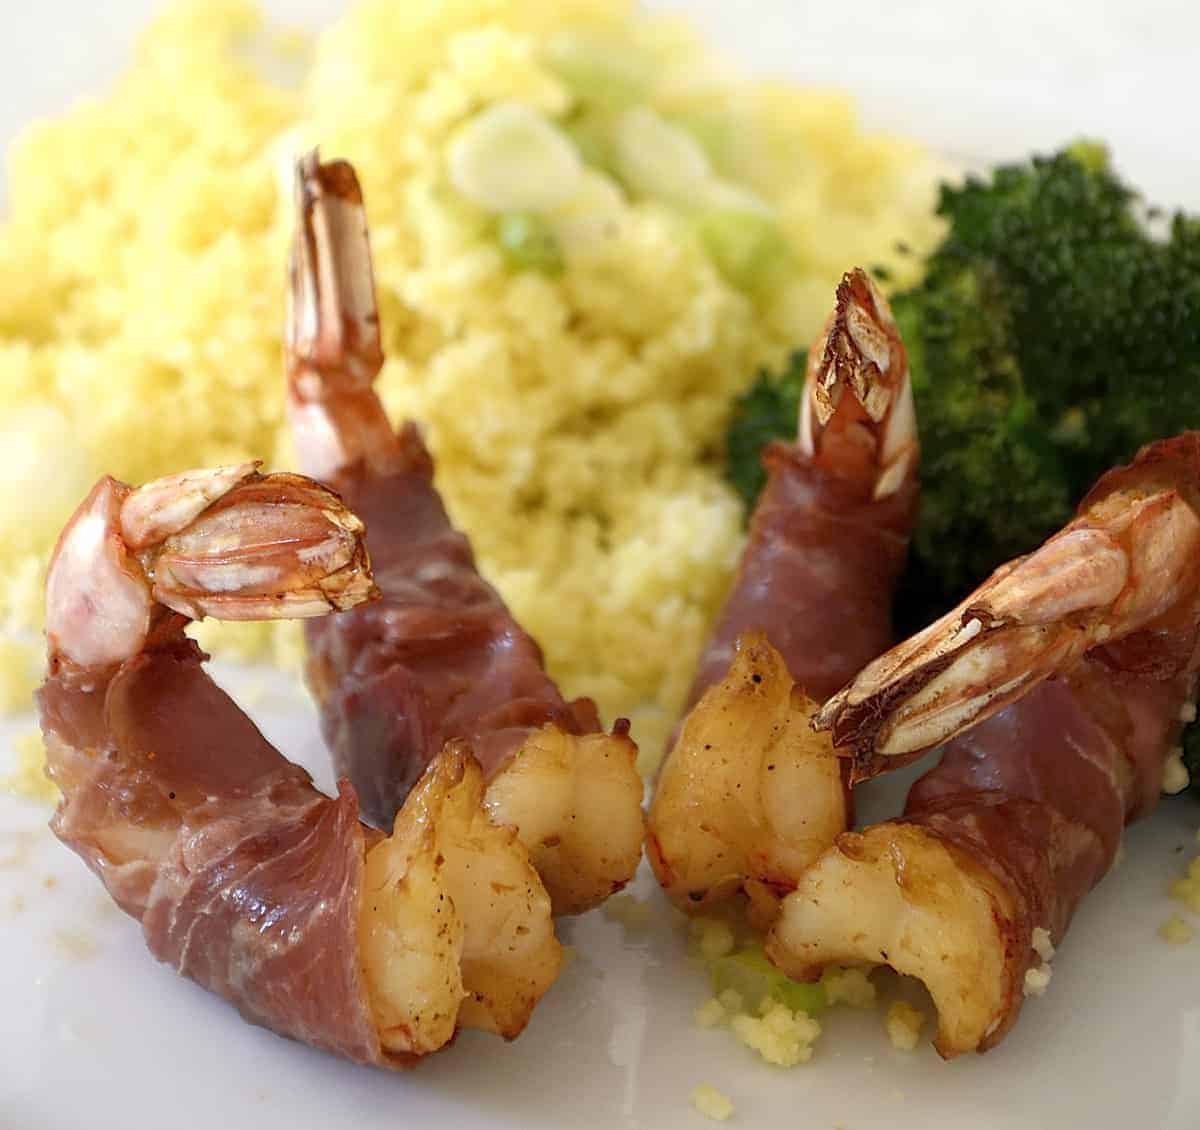 Jumbo shrimp wrapped in prosciutto on a plate with broccoli and couscous.